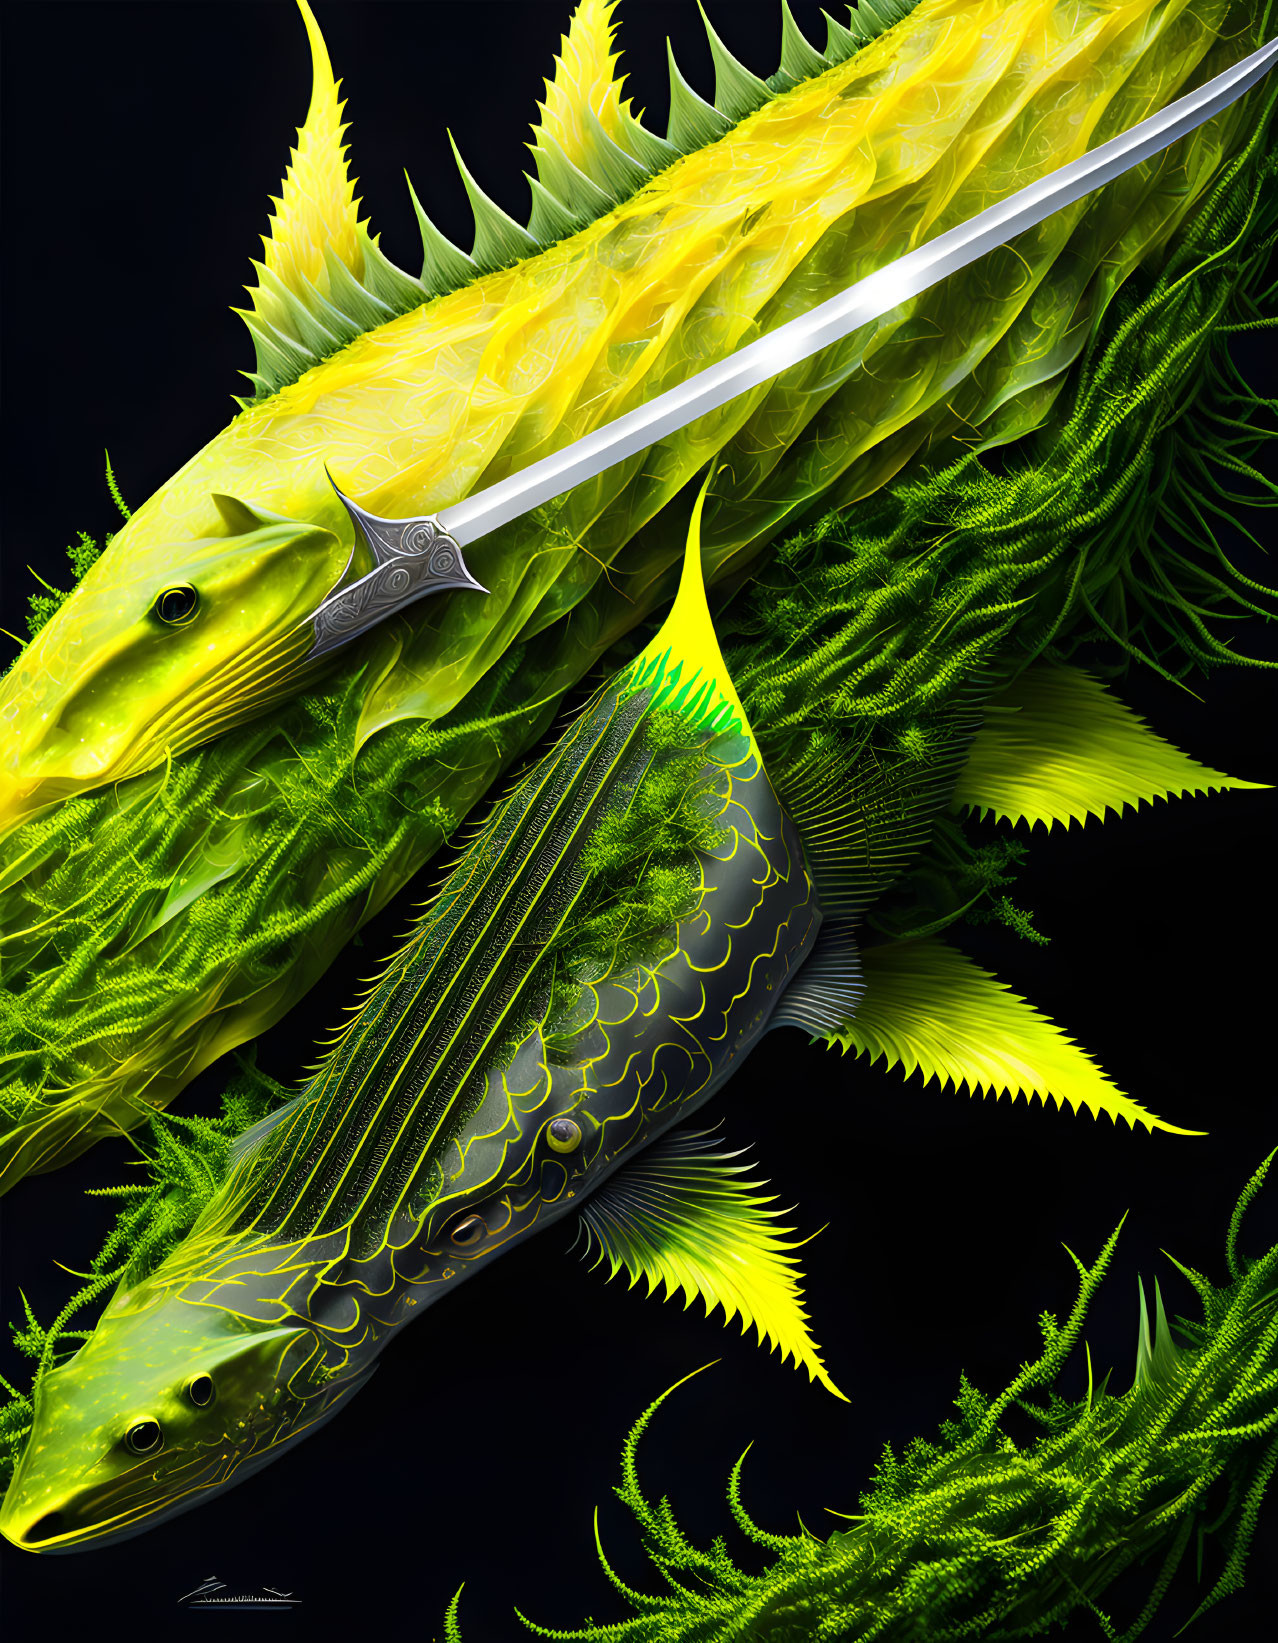 Colorful conceptual artwork: Two stylized fish with intricate patterns and vibrant fins on dark backdrop